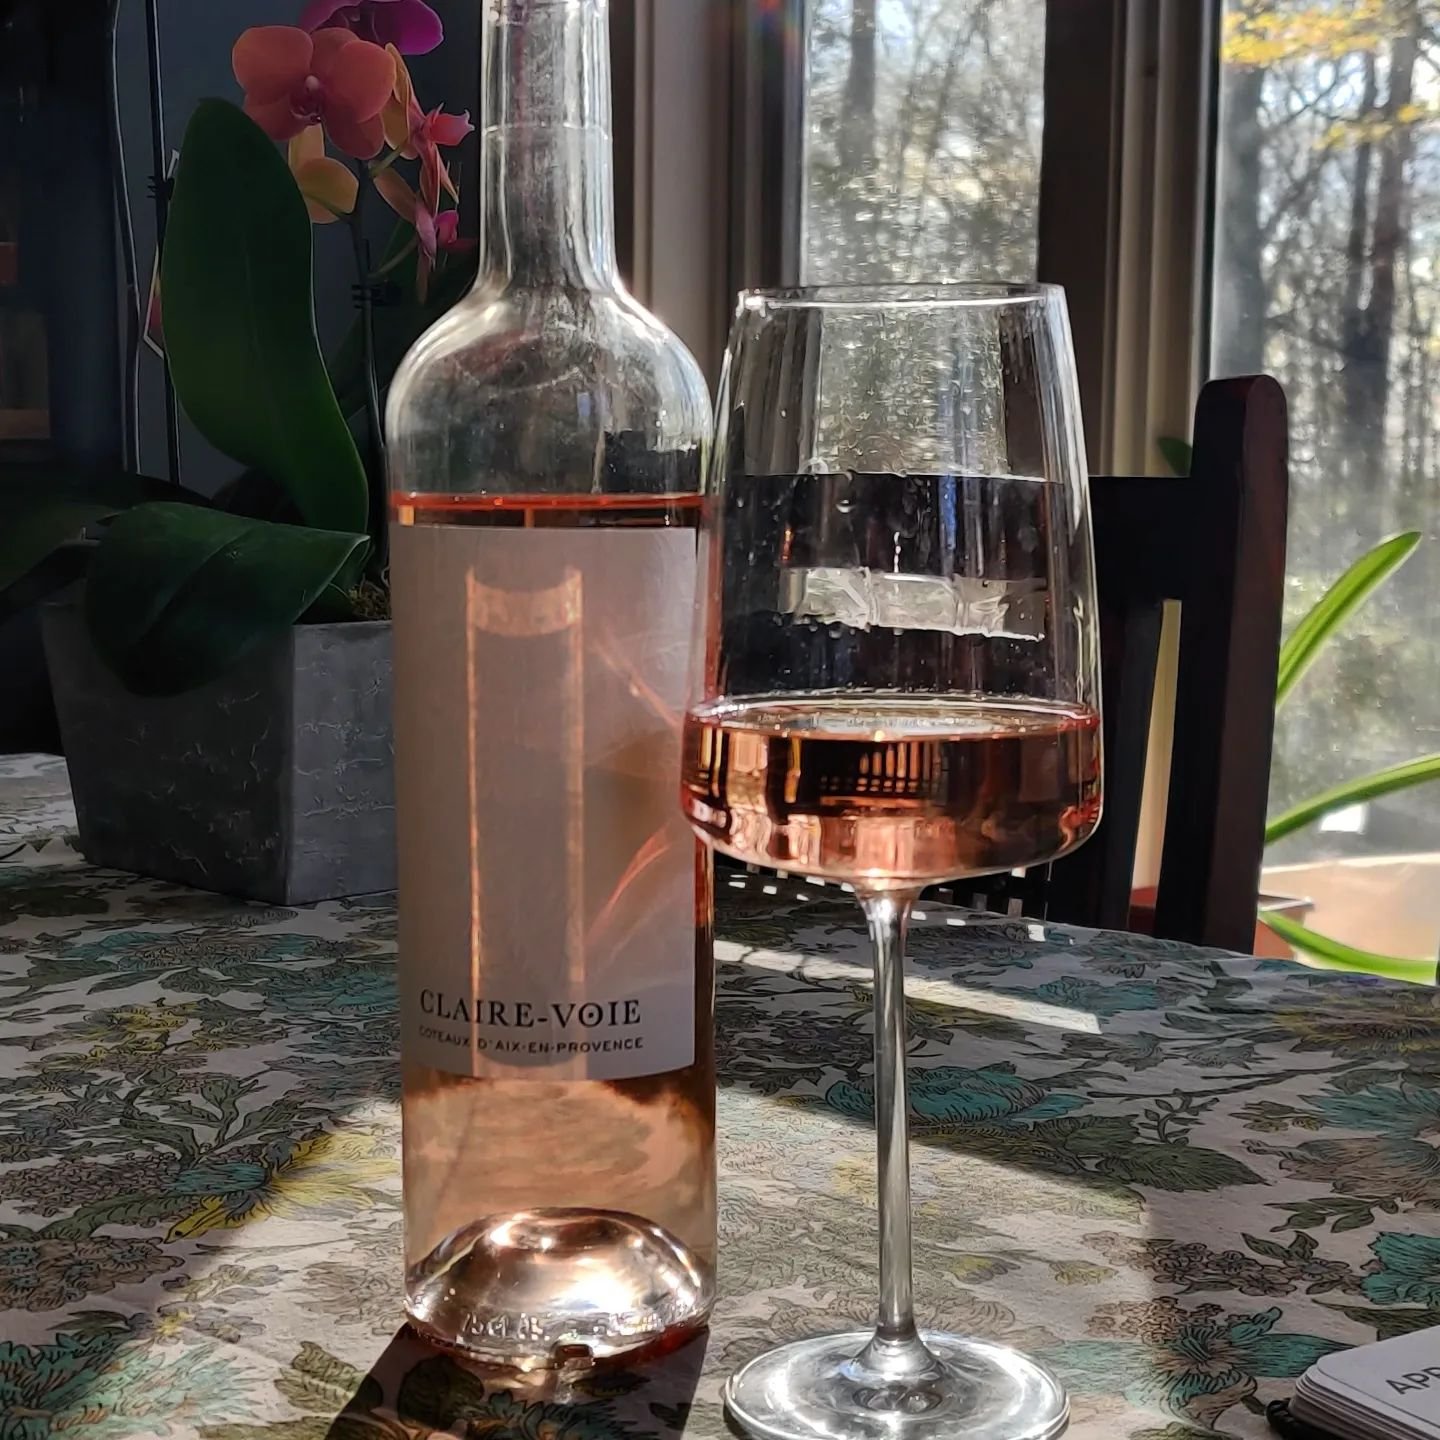 When in doubt about what wine to drink, mother nature will lead the way. When she gives us spring flowers and pink sunsets, the choice is clear.

Claire-voie translates to &quot;clear way,&quot; or, &quot;clear path&quot; in french, and is named afte